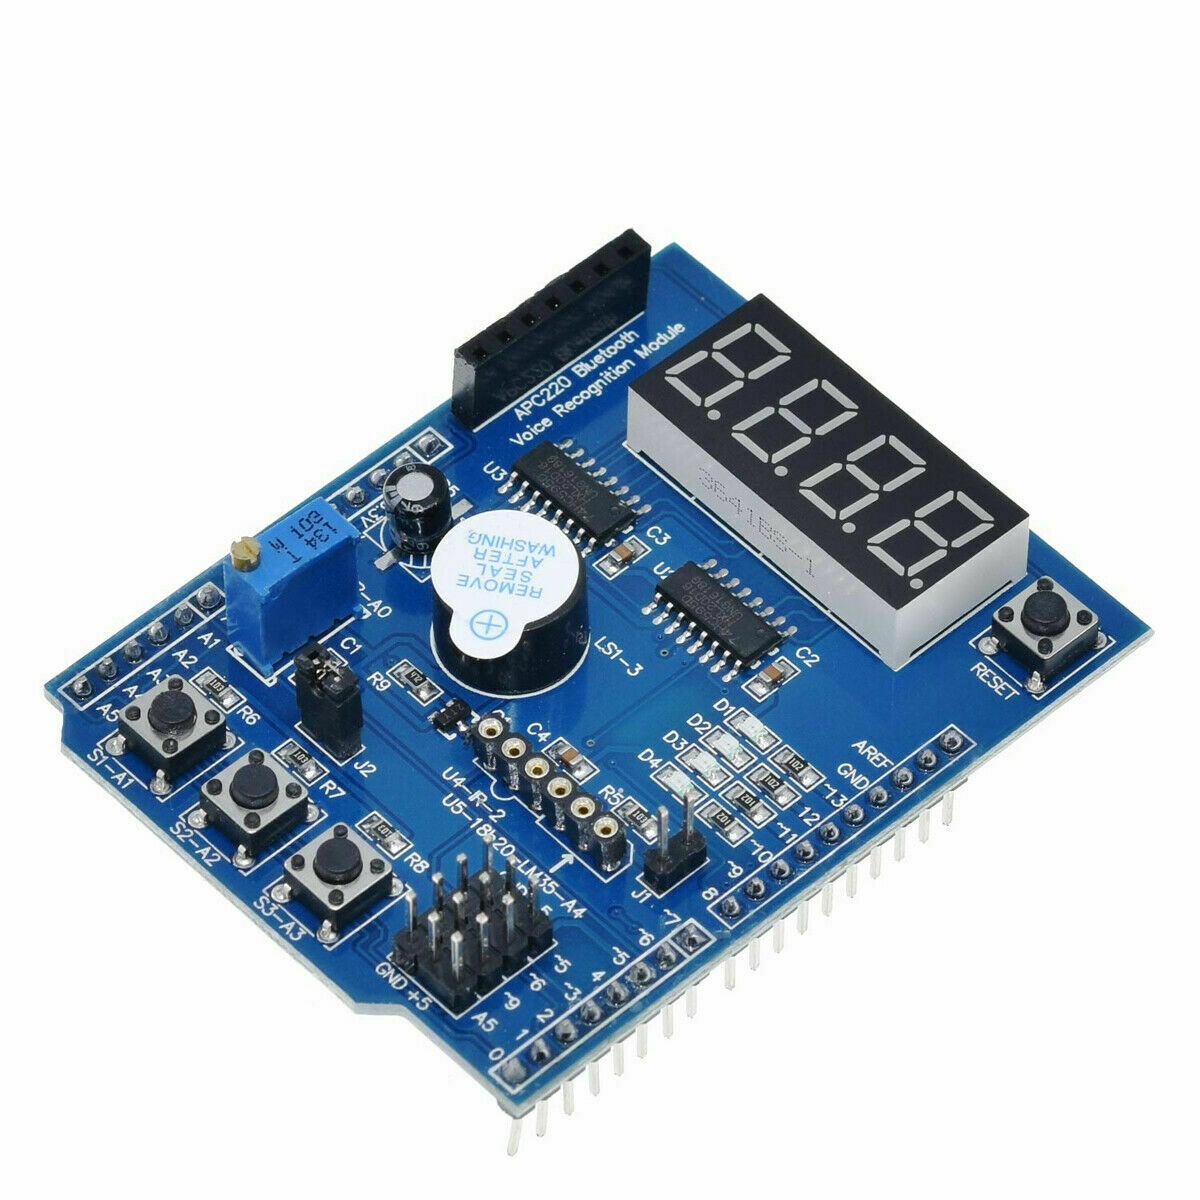 Multi-Function Expansion Based Shield Learning Kit for Arduino